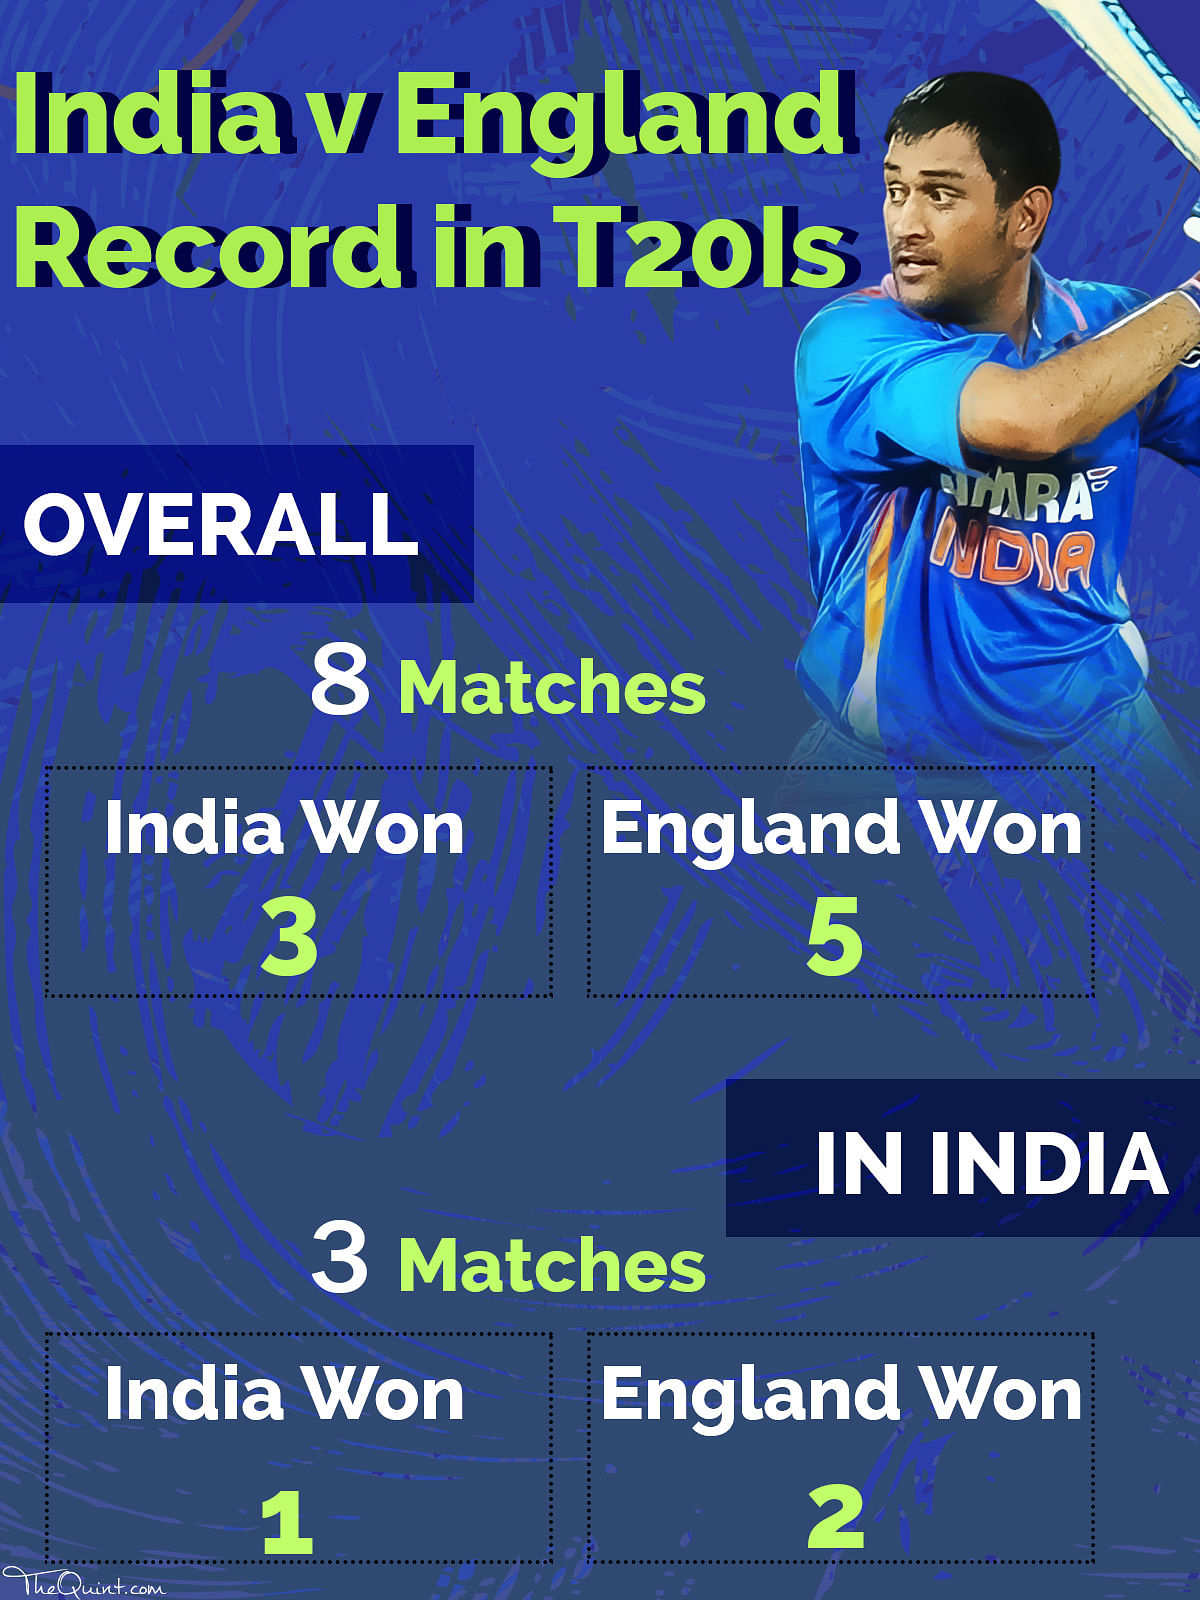 Statistician Arun Gopalakrishnan previews the first T20 between India and England through numbers.